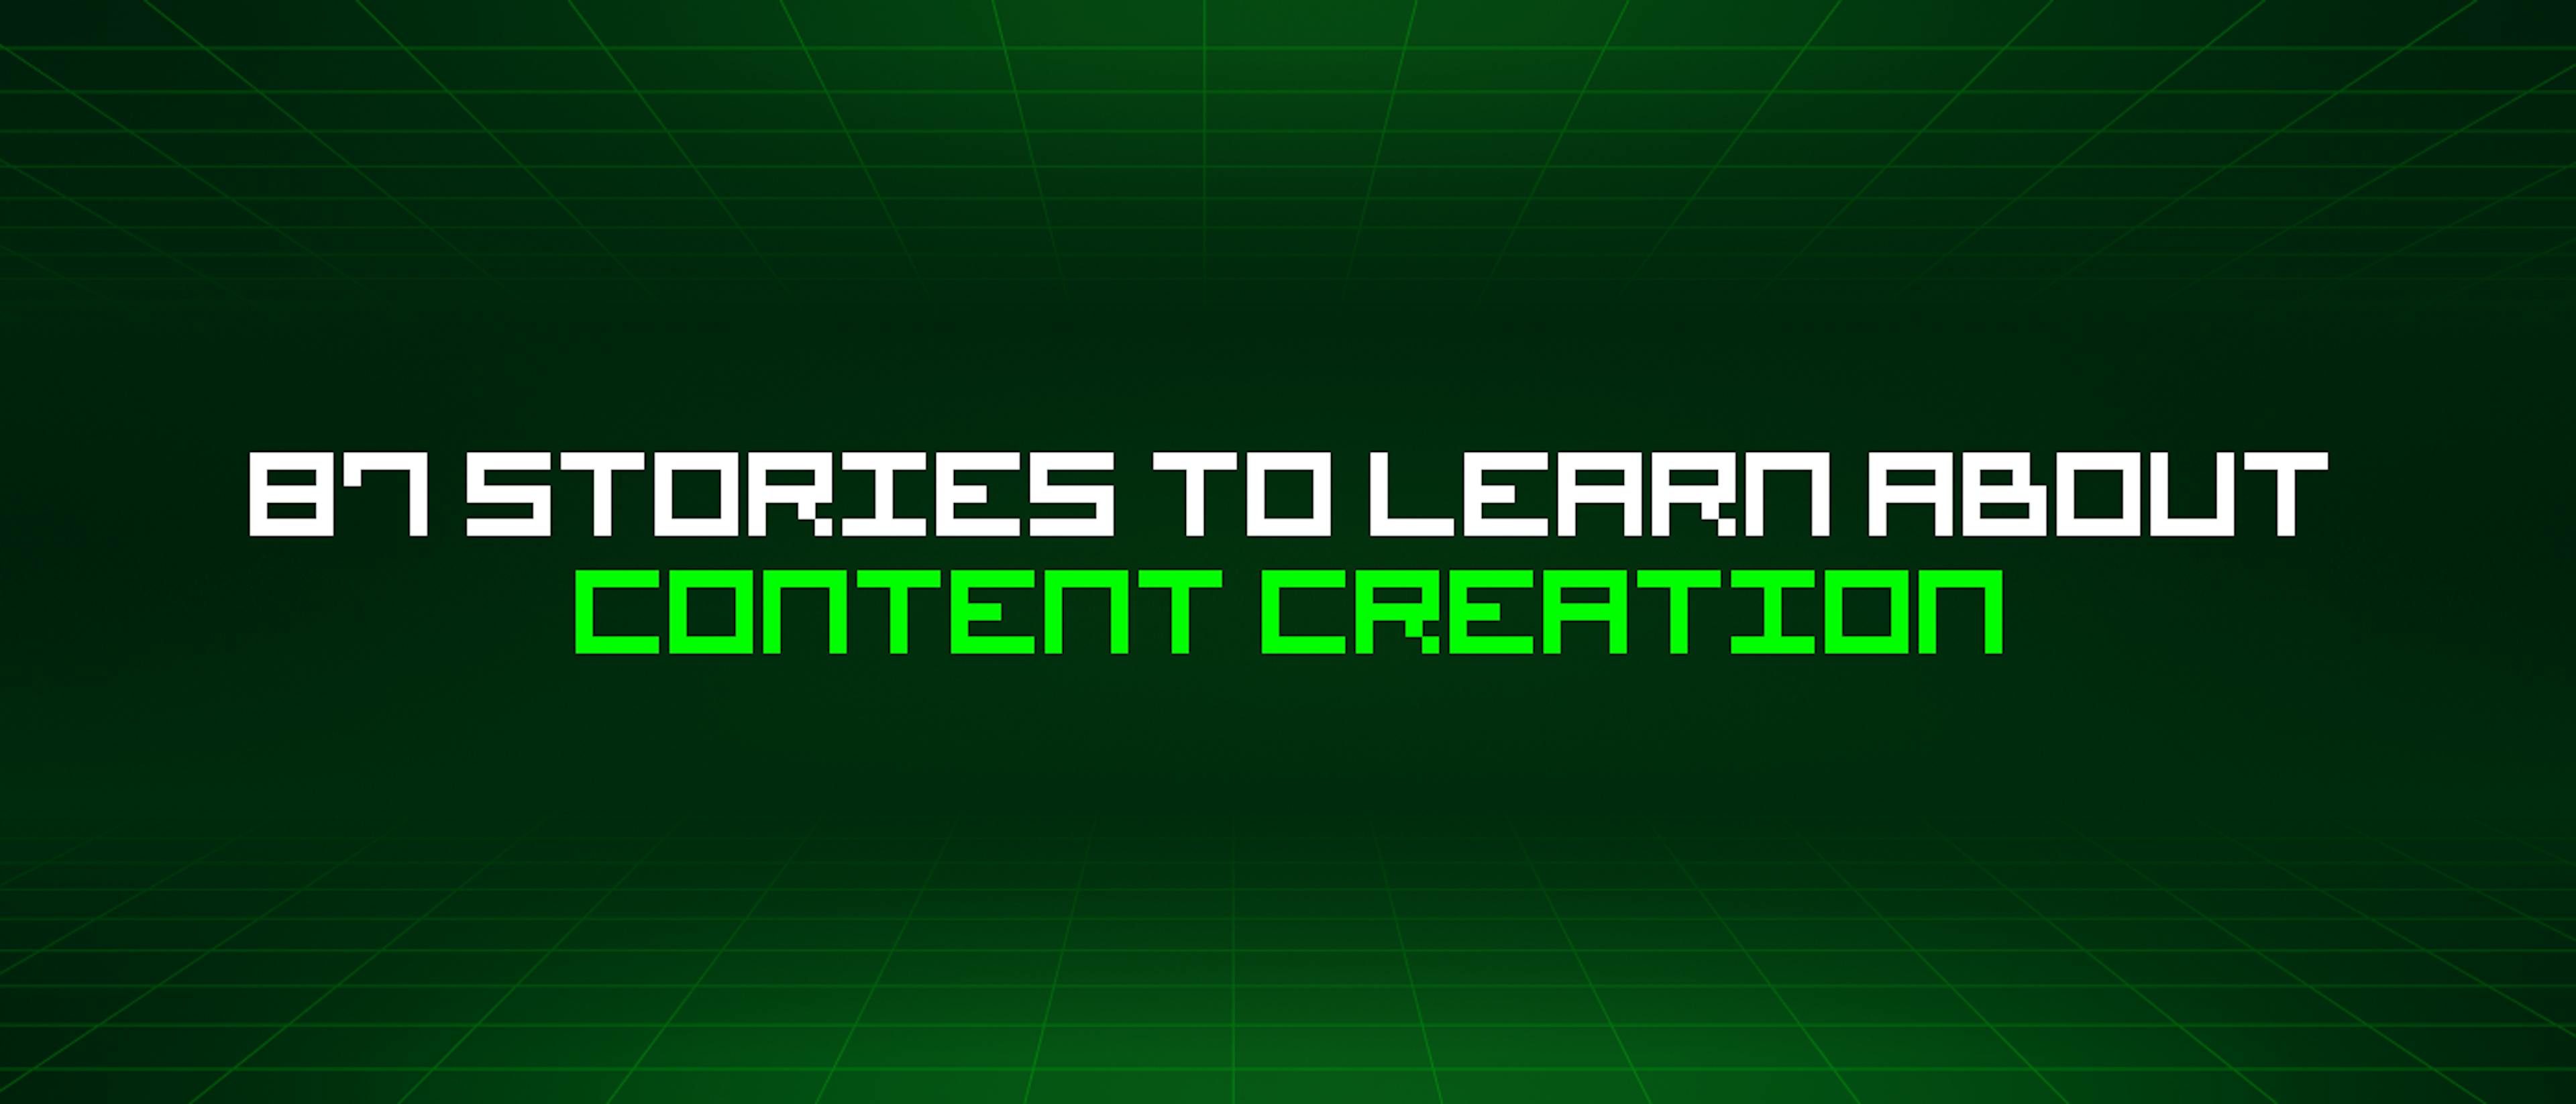 /87-stories-to-learn-about-content-creation feature image